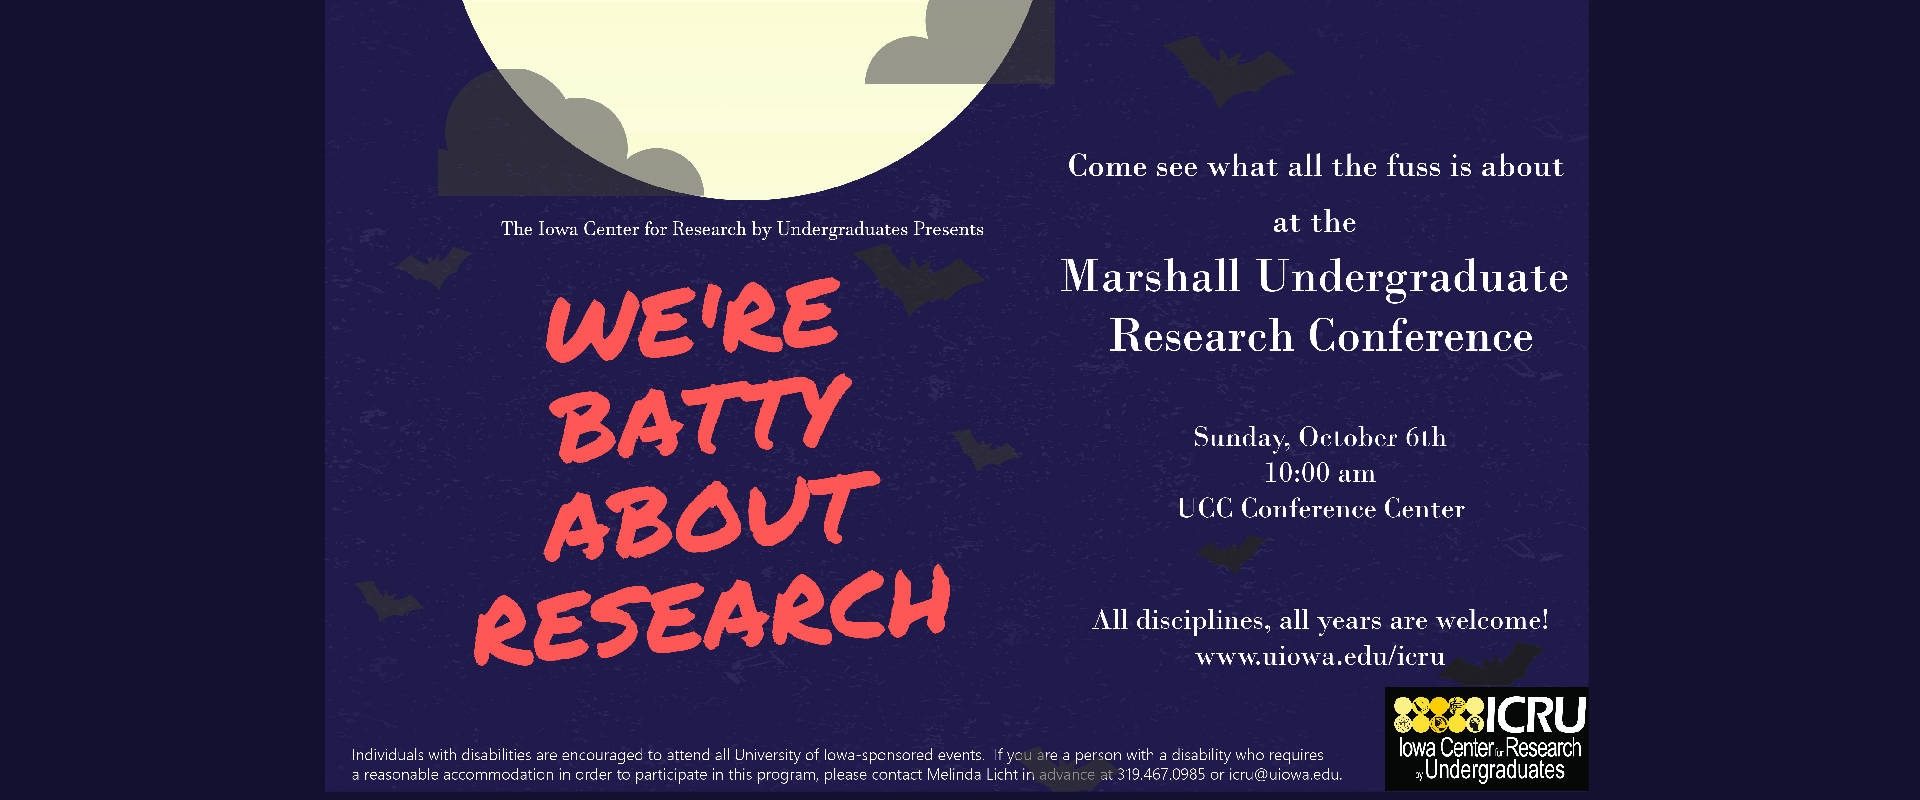 CRU Marshall Undergraduate Research Conference September 27th